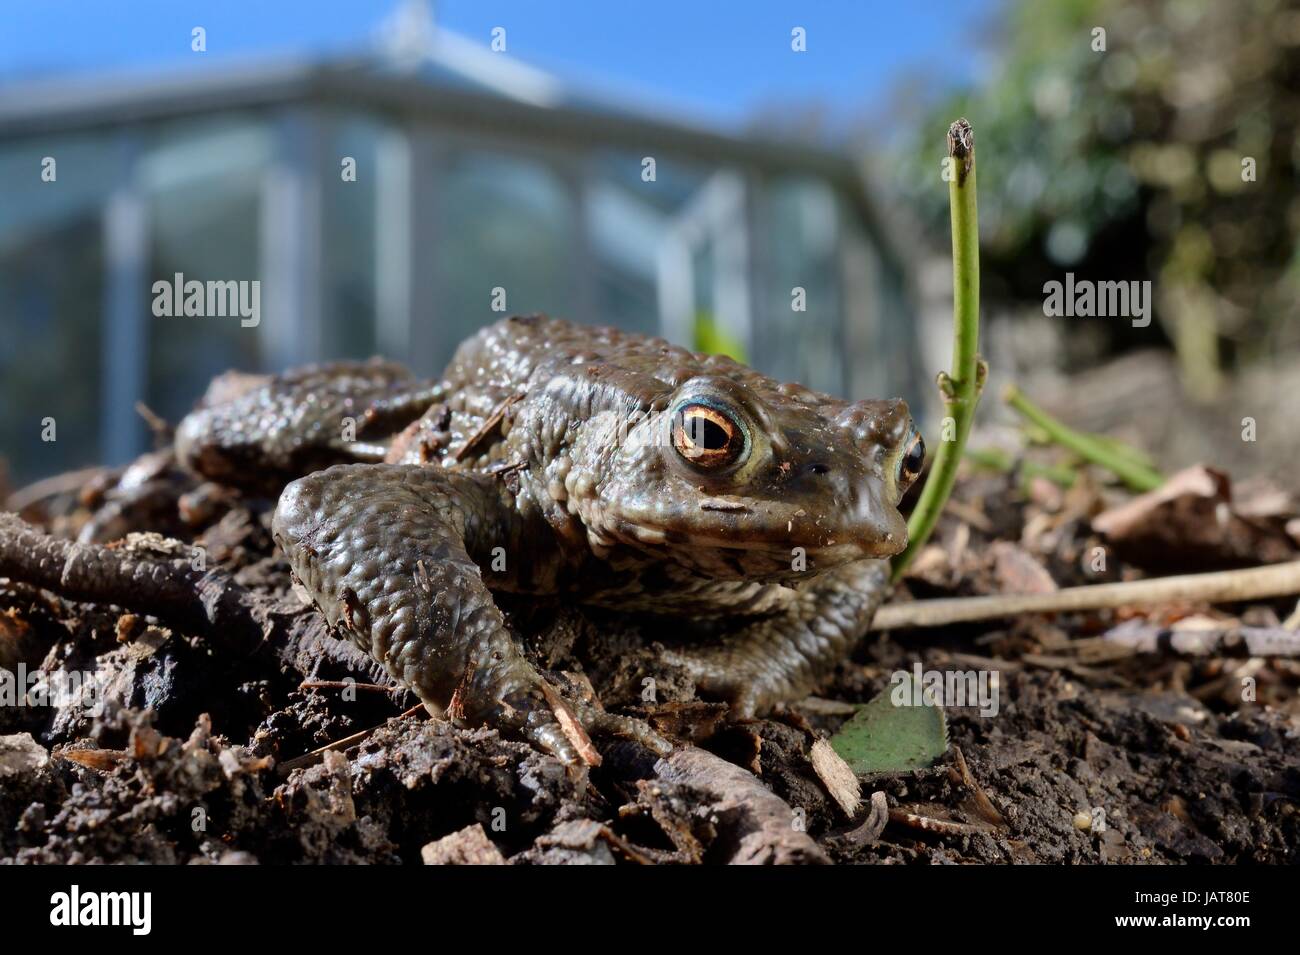 Common toad (Bufo bufo) on the move in a garden flowerbed next to a conservatory, Wiltshire, UK, March. Stock Photo